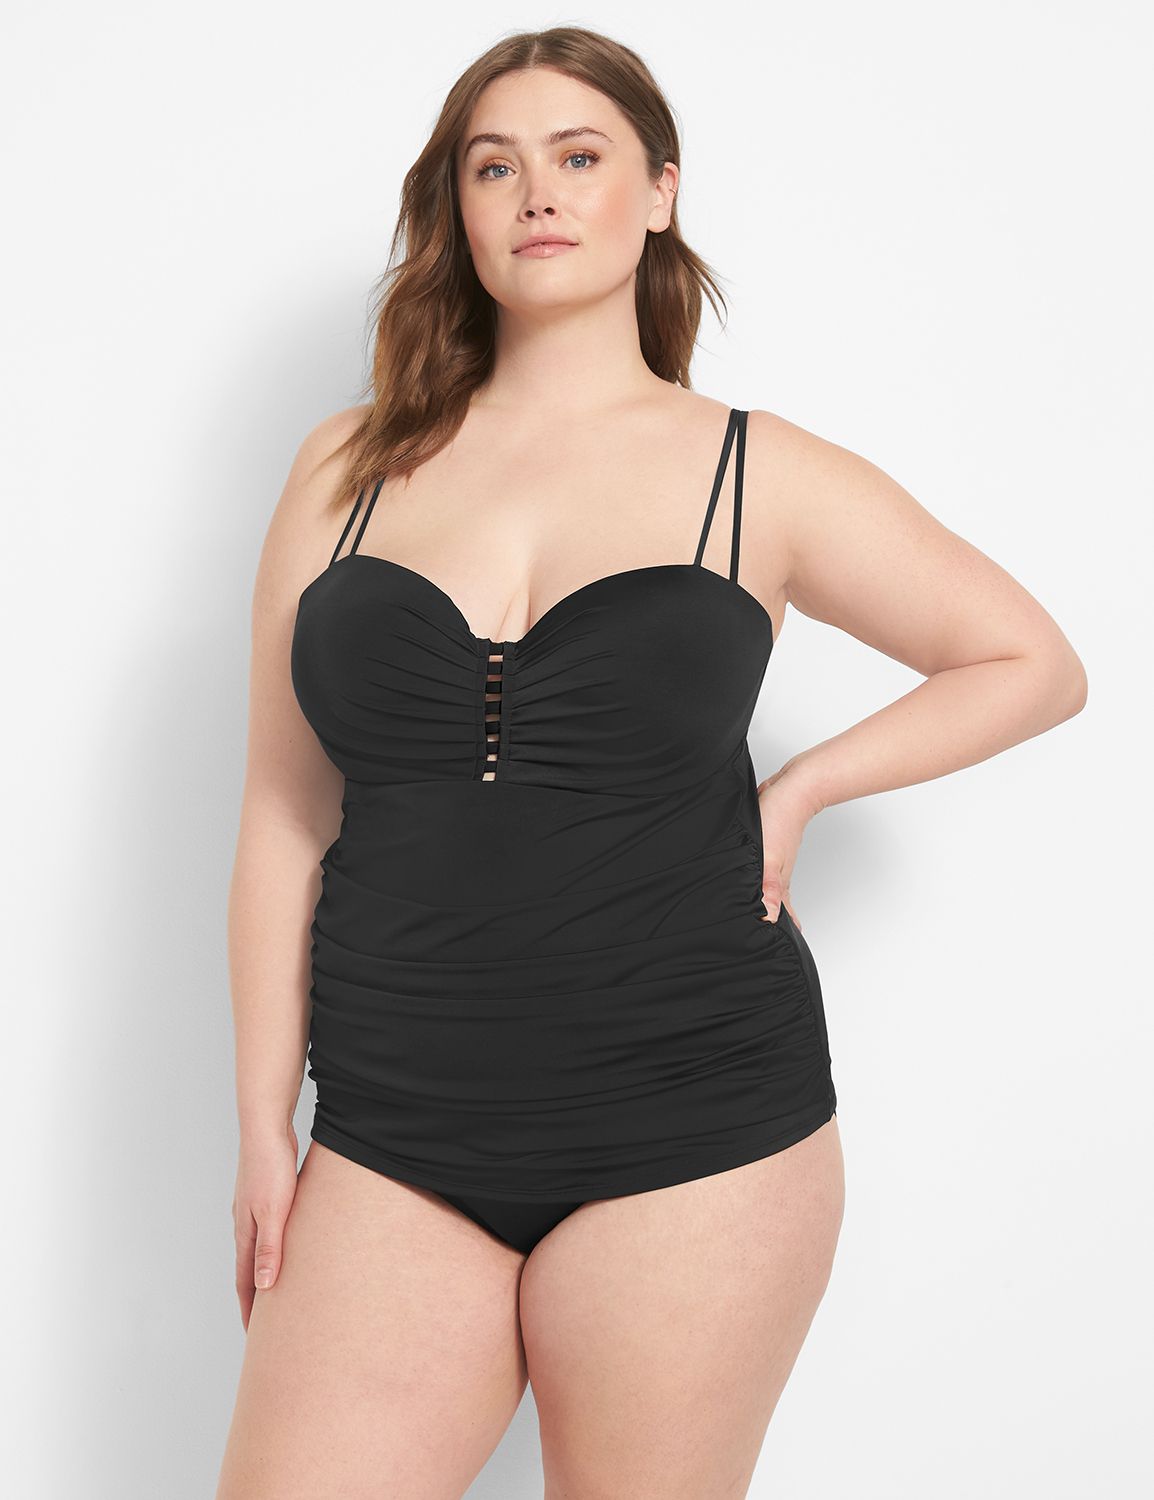 Cacique Black Shapewear for Women for sale